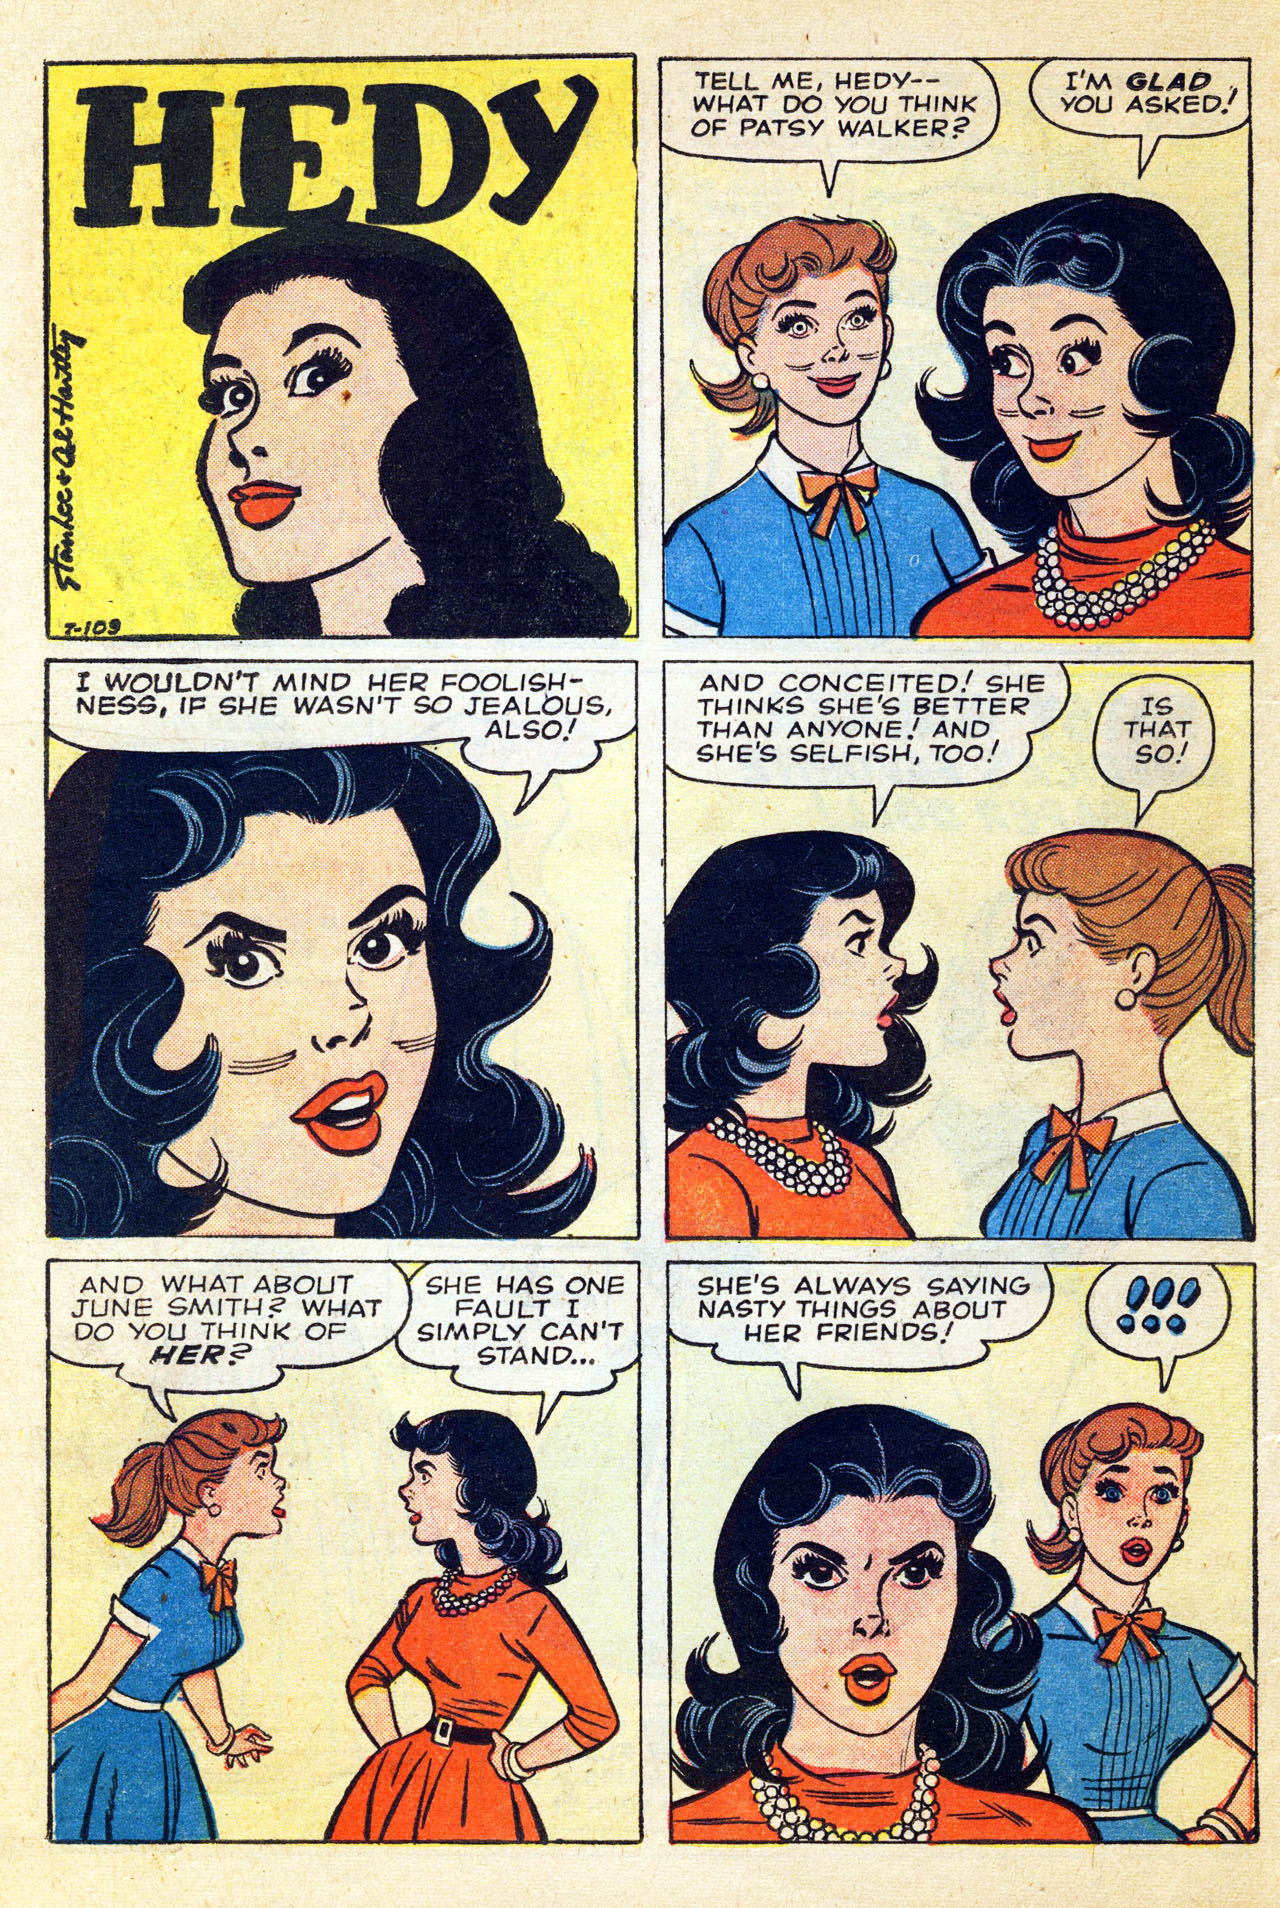 Read online Patsy and Hedy comic -  Issue #62 - 14